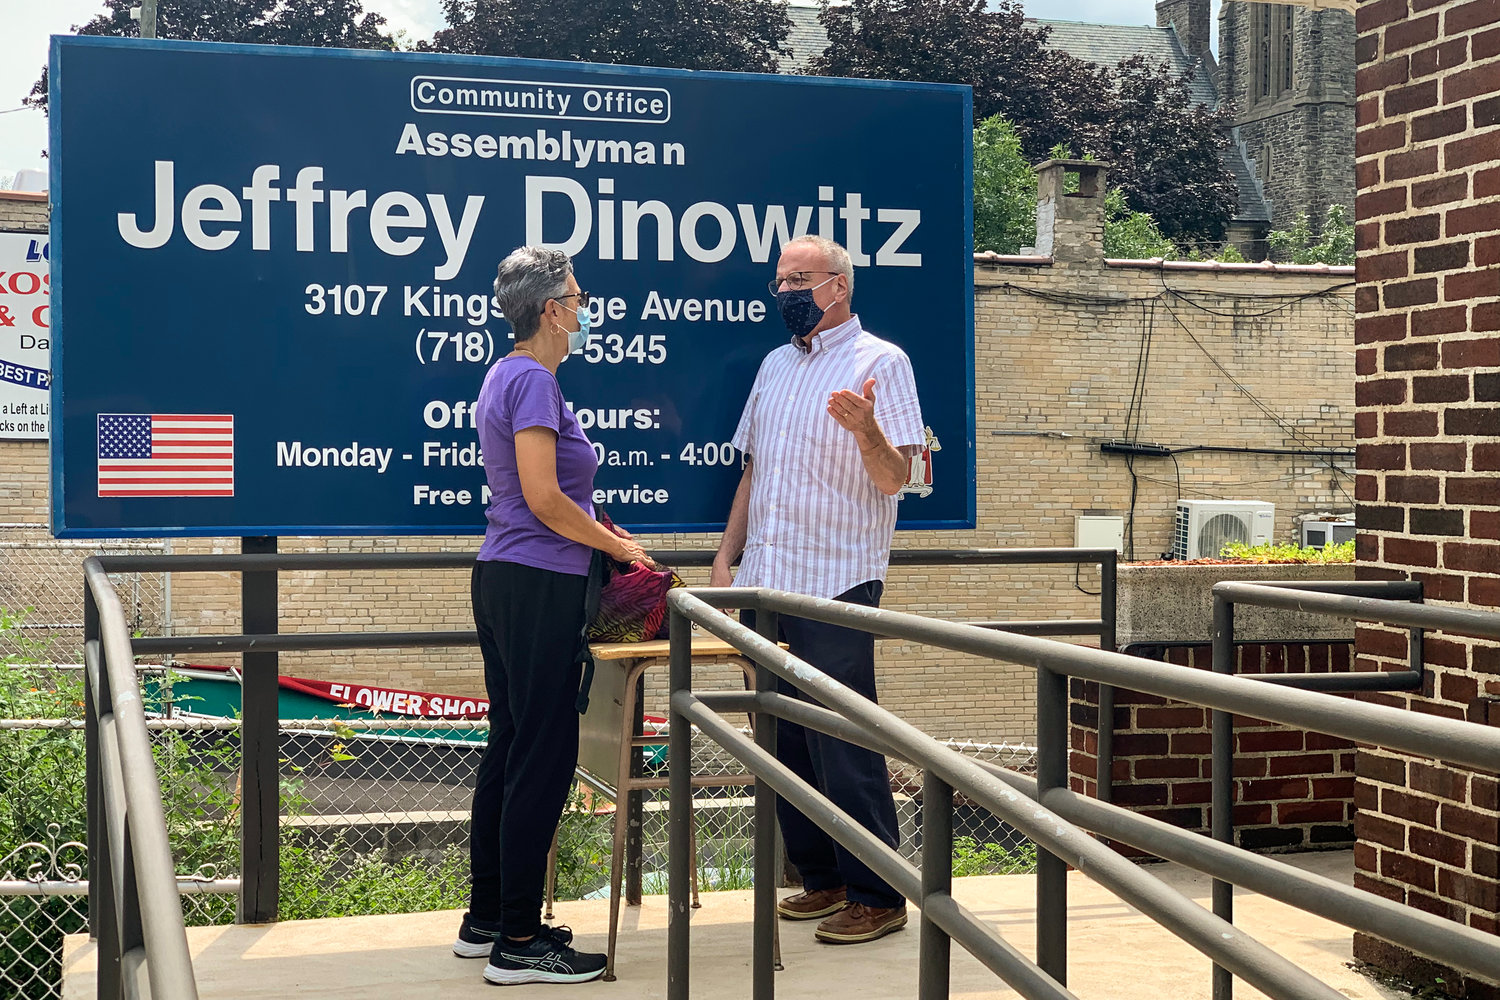 While Assemblyman Jeffrey Dinowitz would like to welcome constituents inside his office, the lawmaker and his team have maintained an outdoor set-up. When constituents are finally allowed back in, Dinowitz wants to make sure they’re fully vaccinated.